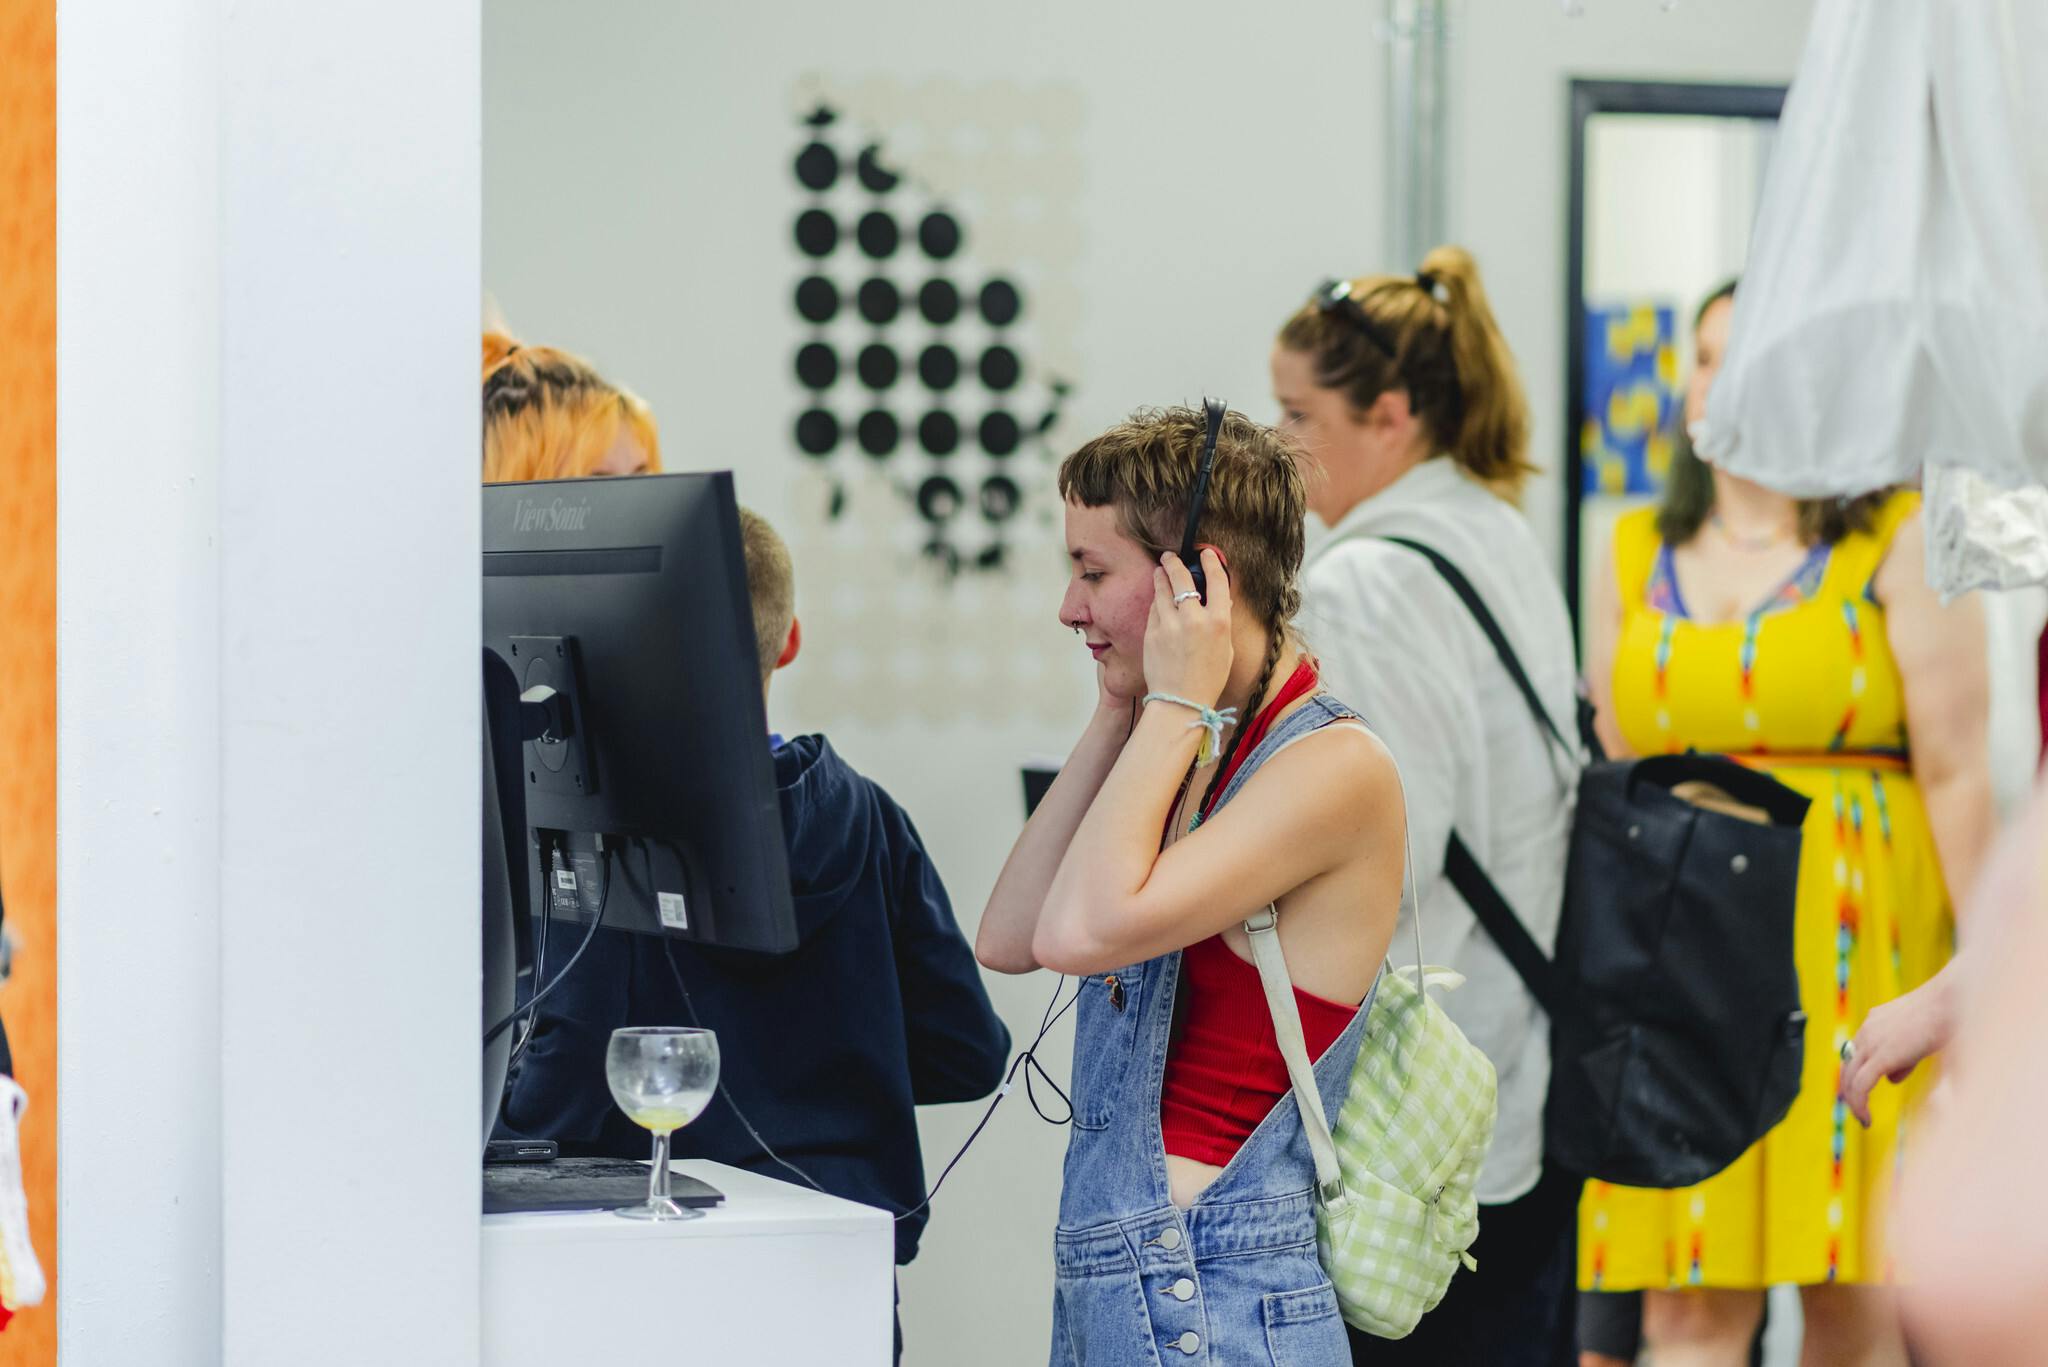 A person wearing dungarees and a red top holds headphones to their ears in a white walled art gallery at the Extended BA show in Summer 2022